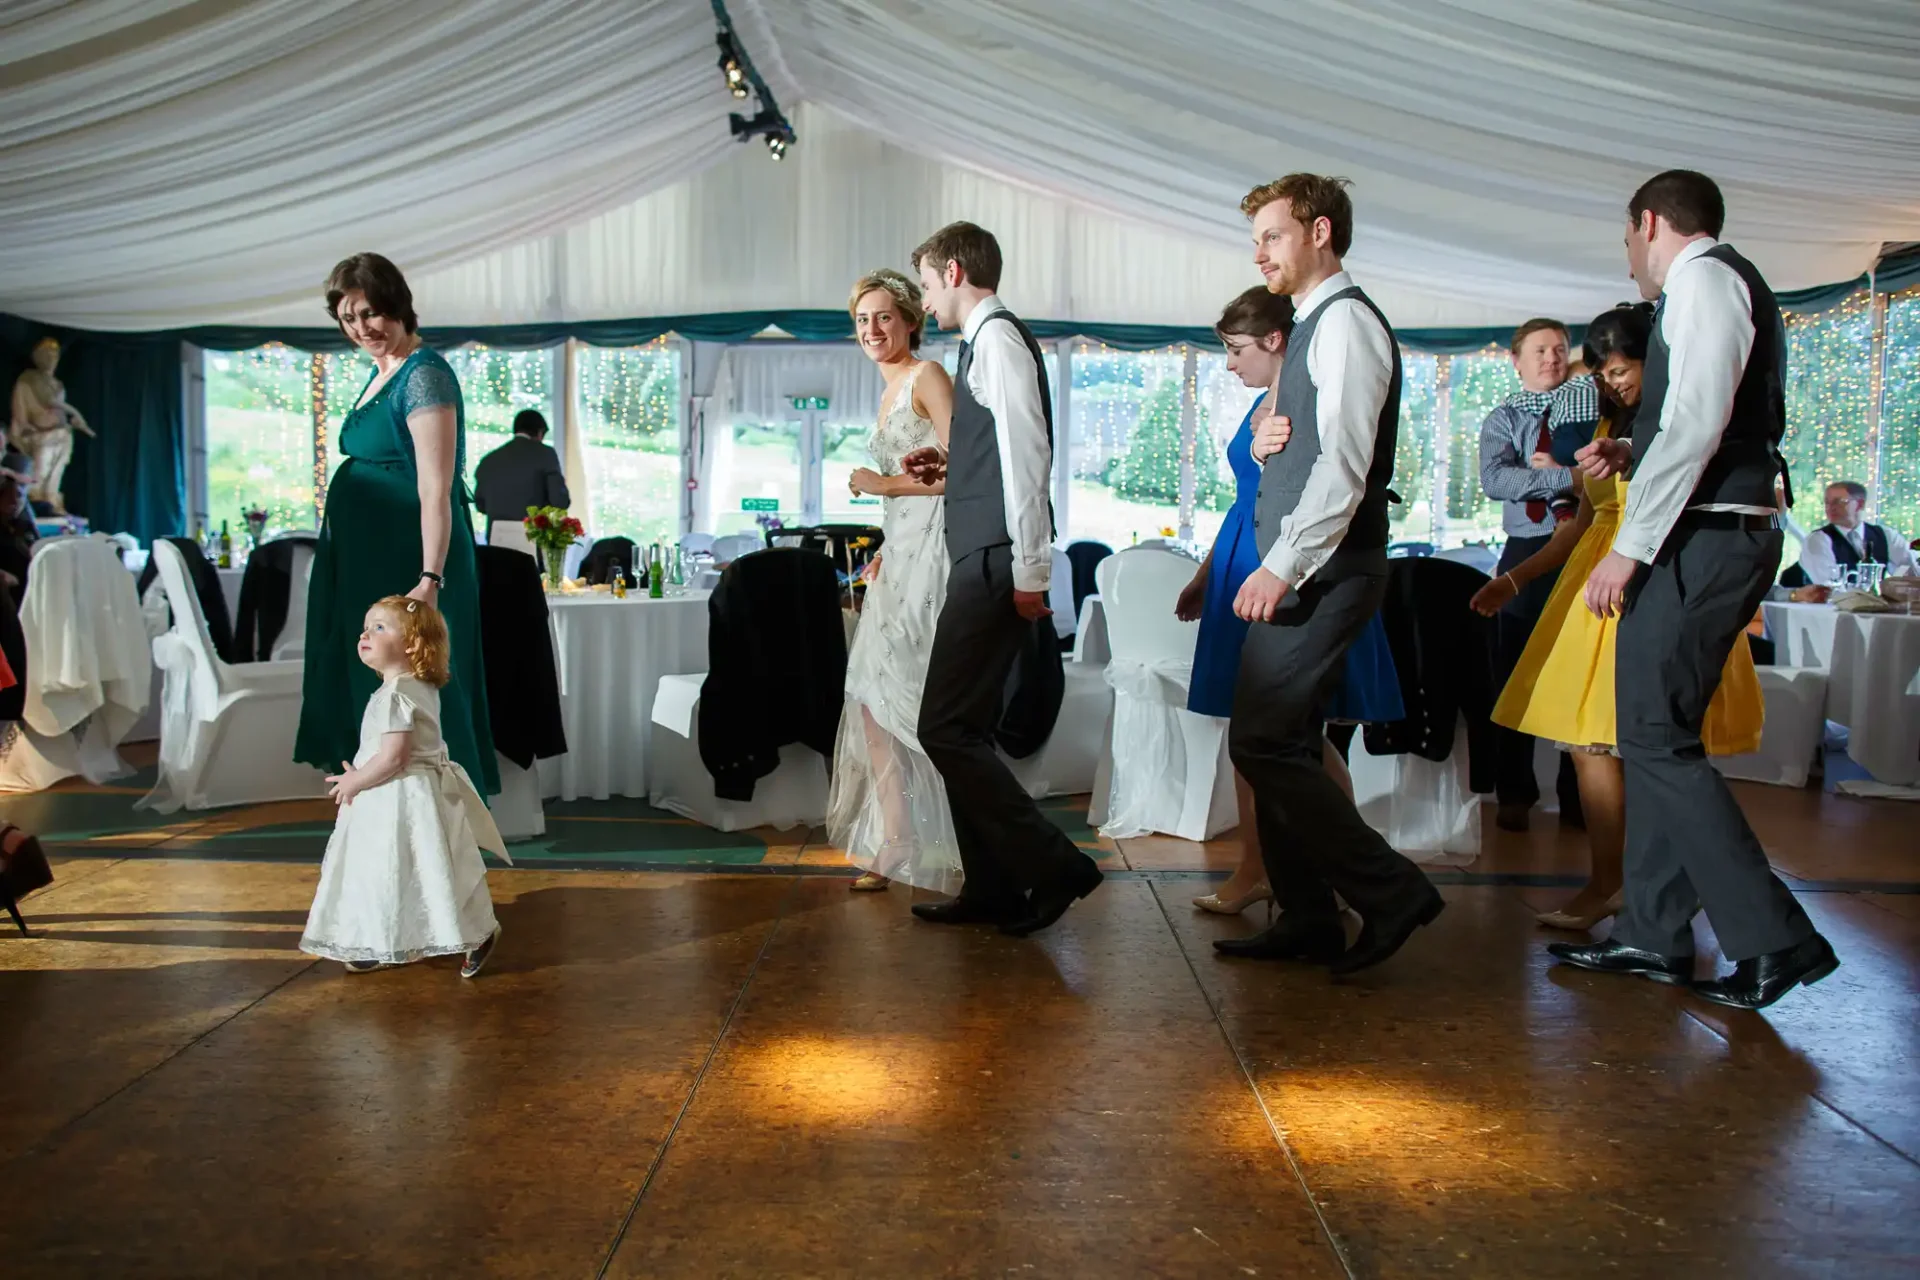 Guests dancing at a wedding reception, including a young girl looking up at a smiling woman in a long dress.